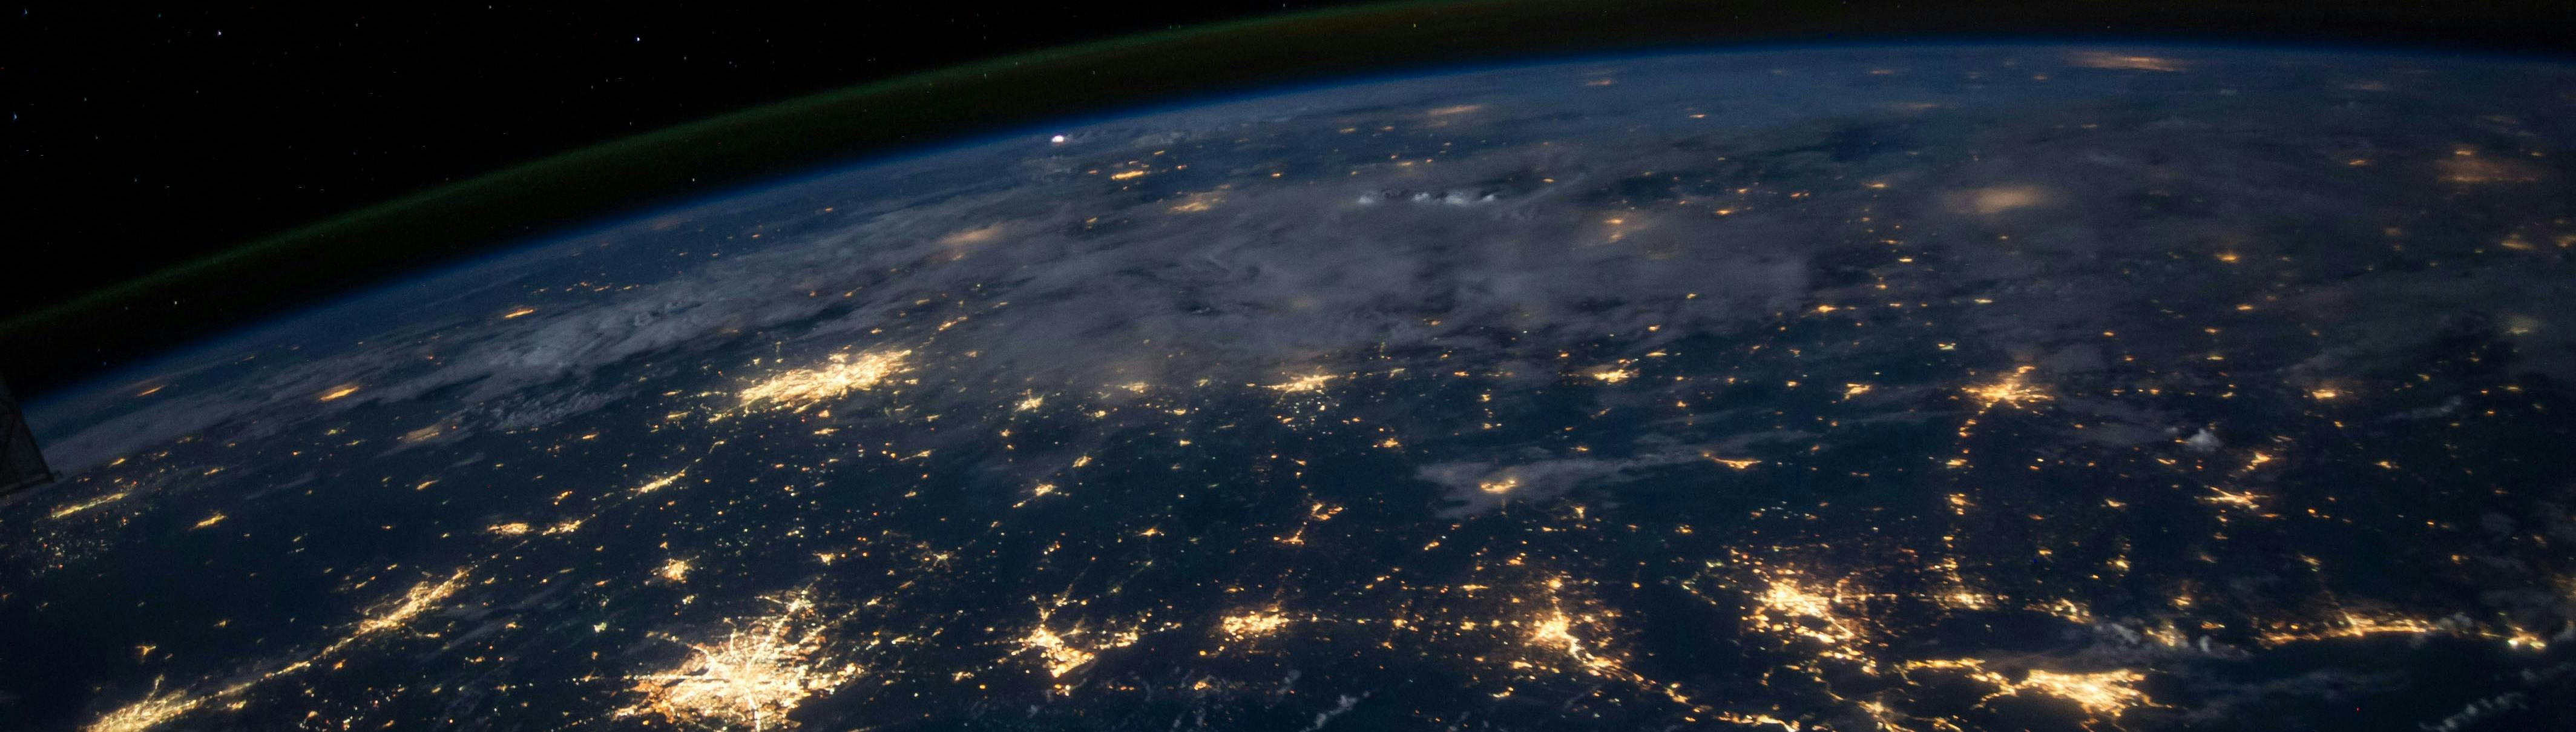 Photo of earth from space at night